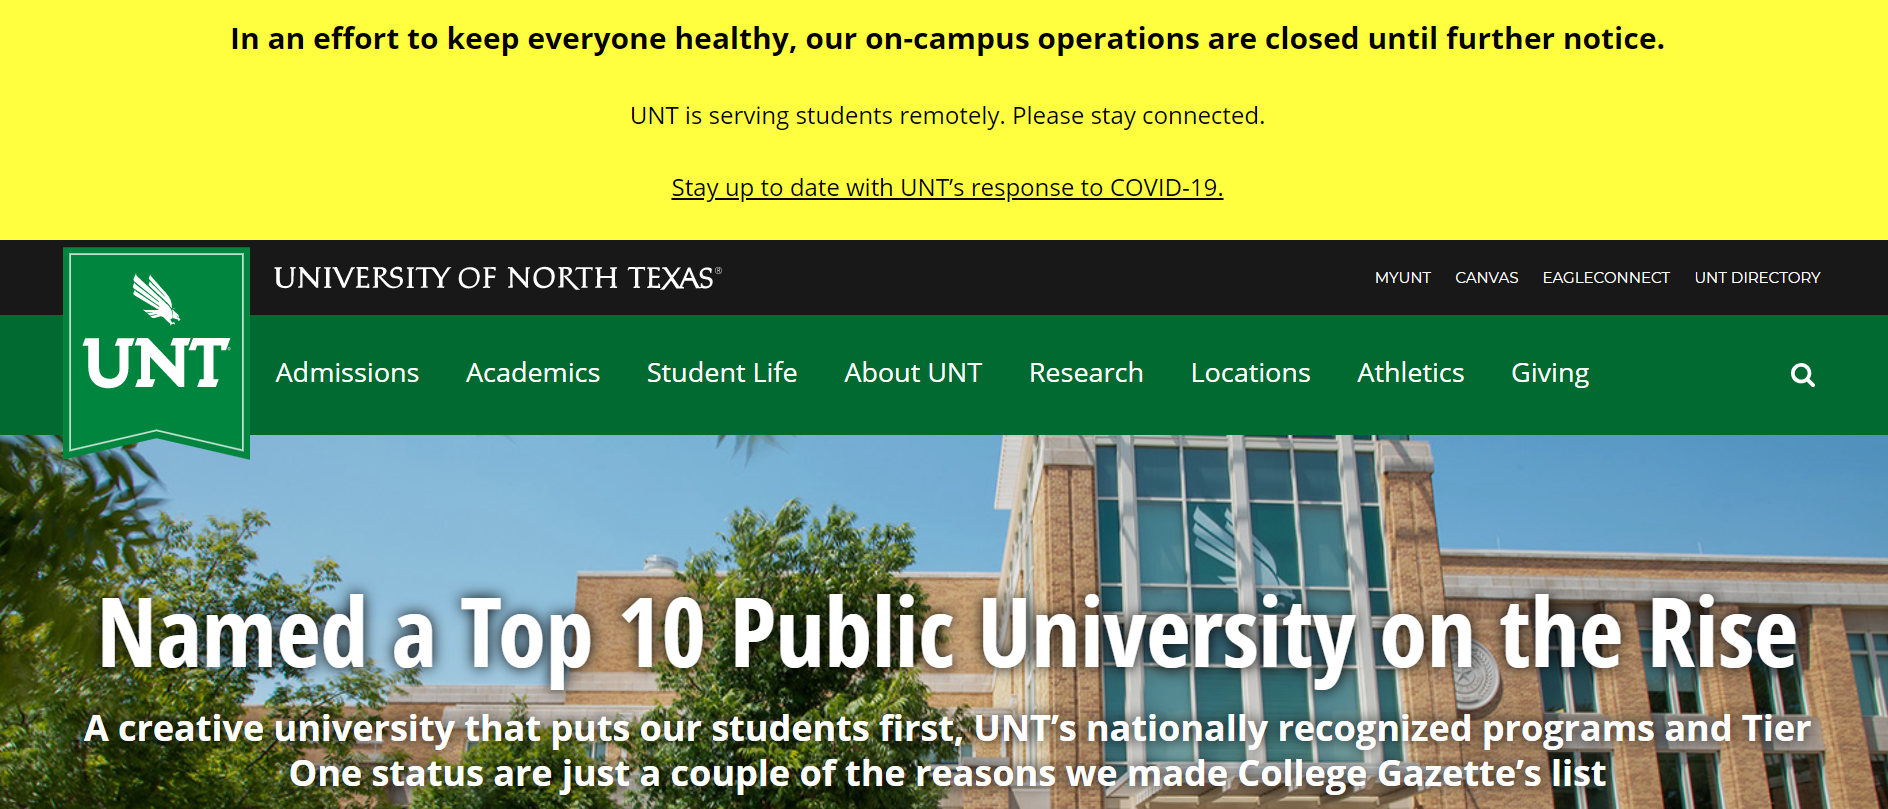 Yellow bar with text stating that UNT's on-campus operations are closed until further notice, above a green page menu and a photo banner with a picture of the Union and text celebrating UNT as a top 10 public university on the rise.